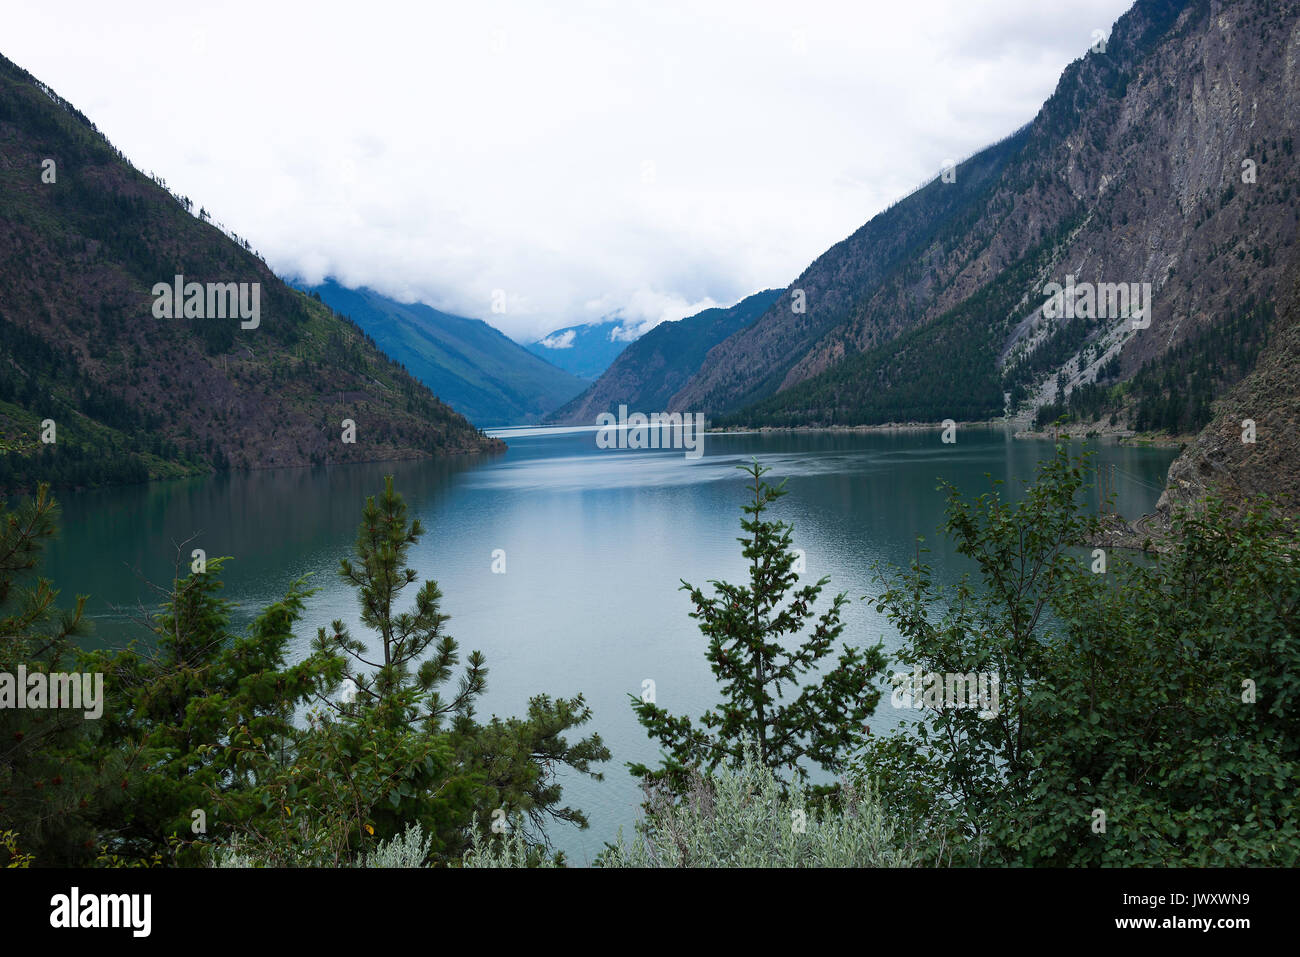 Duffey Lake Surrounded by Mountains near Mount Currie British Columbia Canada Stock Photo